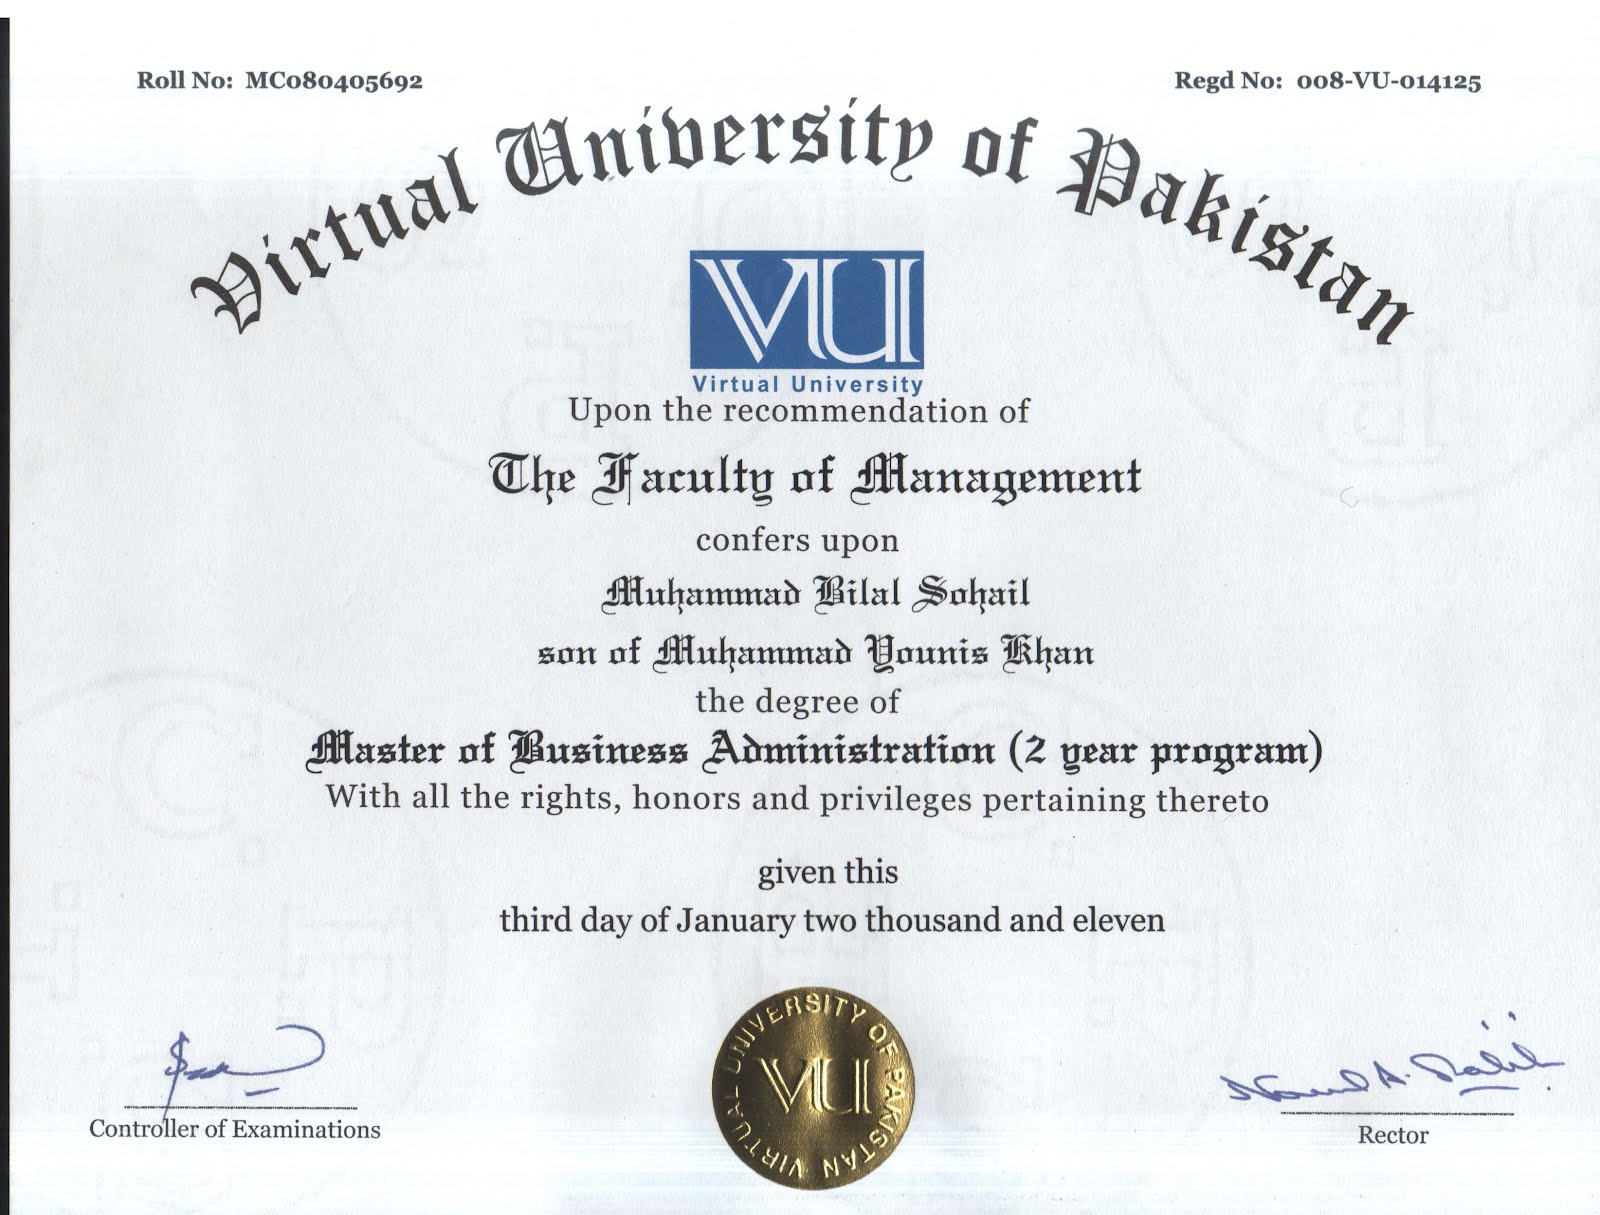 VU Bright One Serious Issue about MBA Degree Should Report to VU Management..... Pls comments